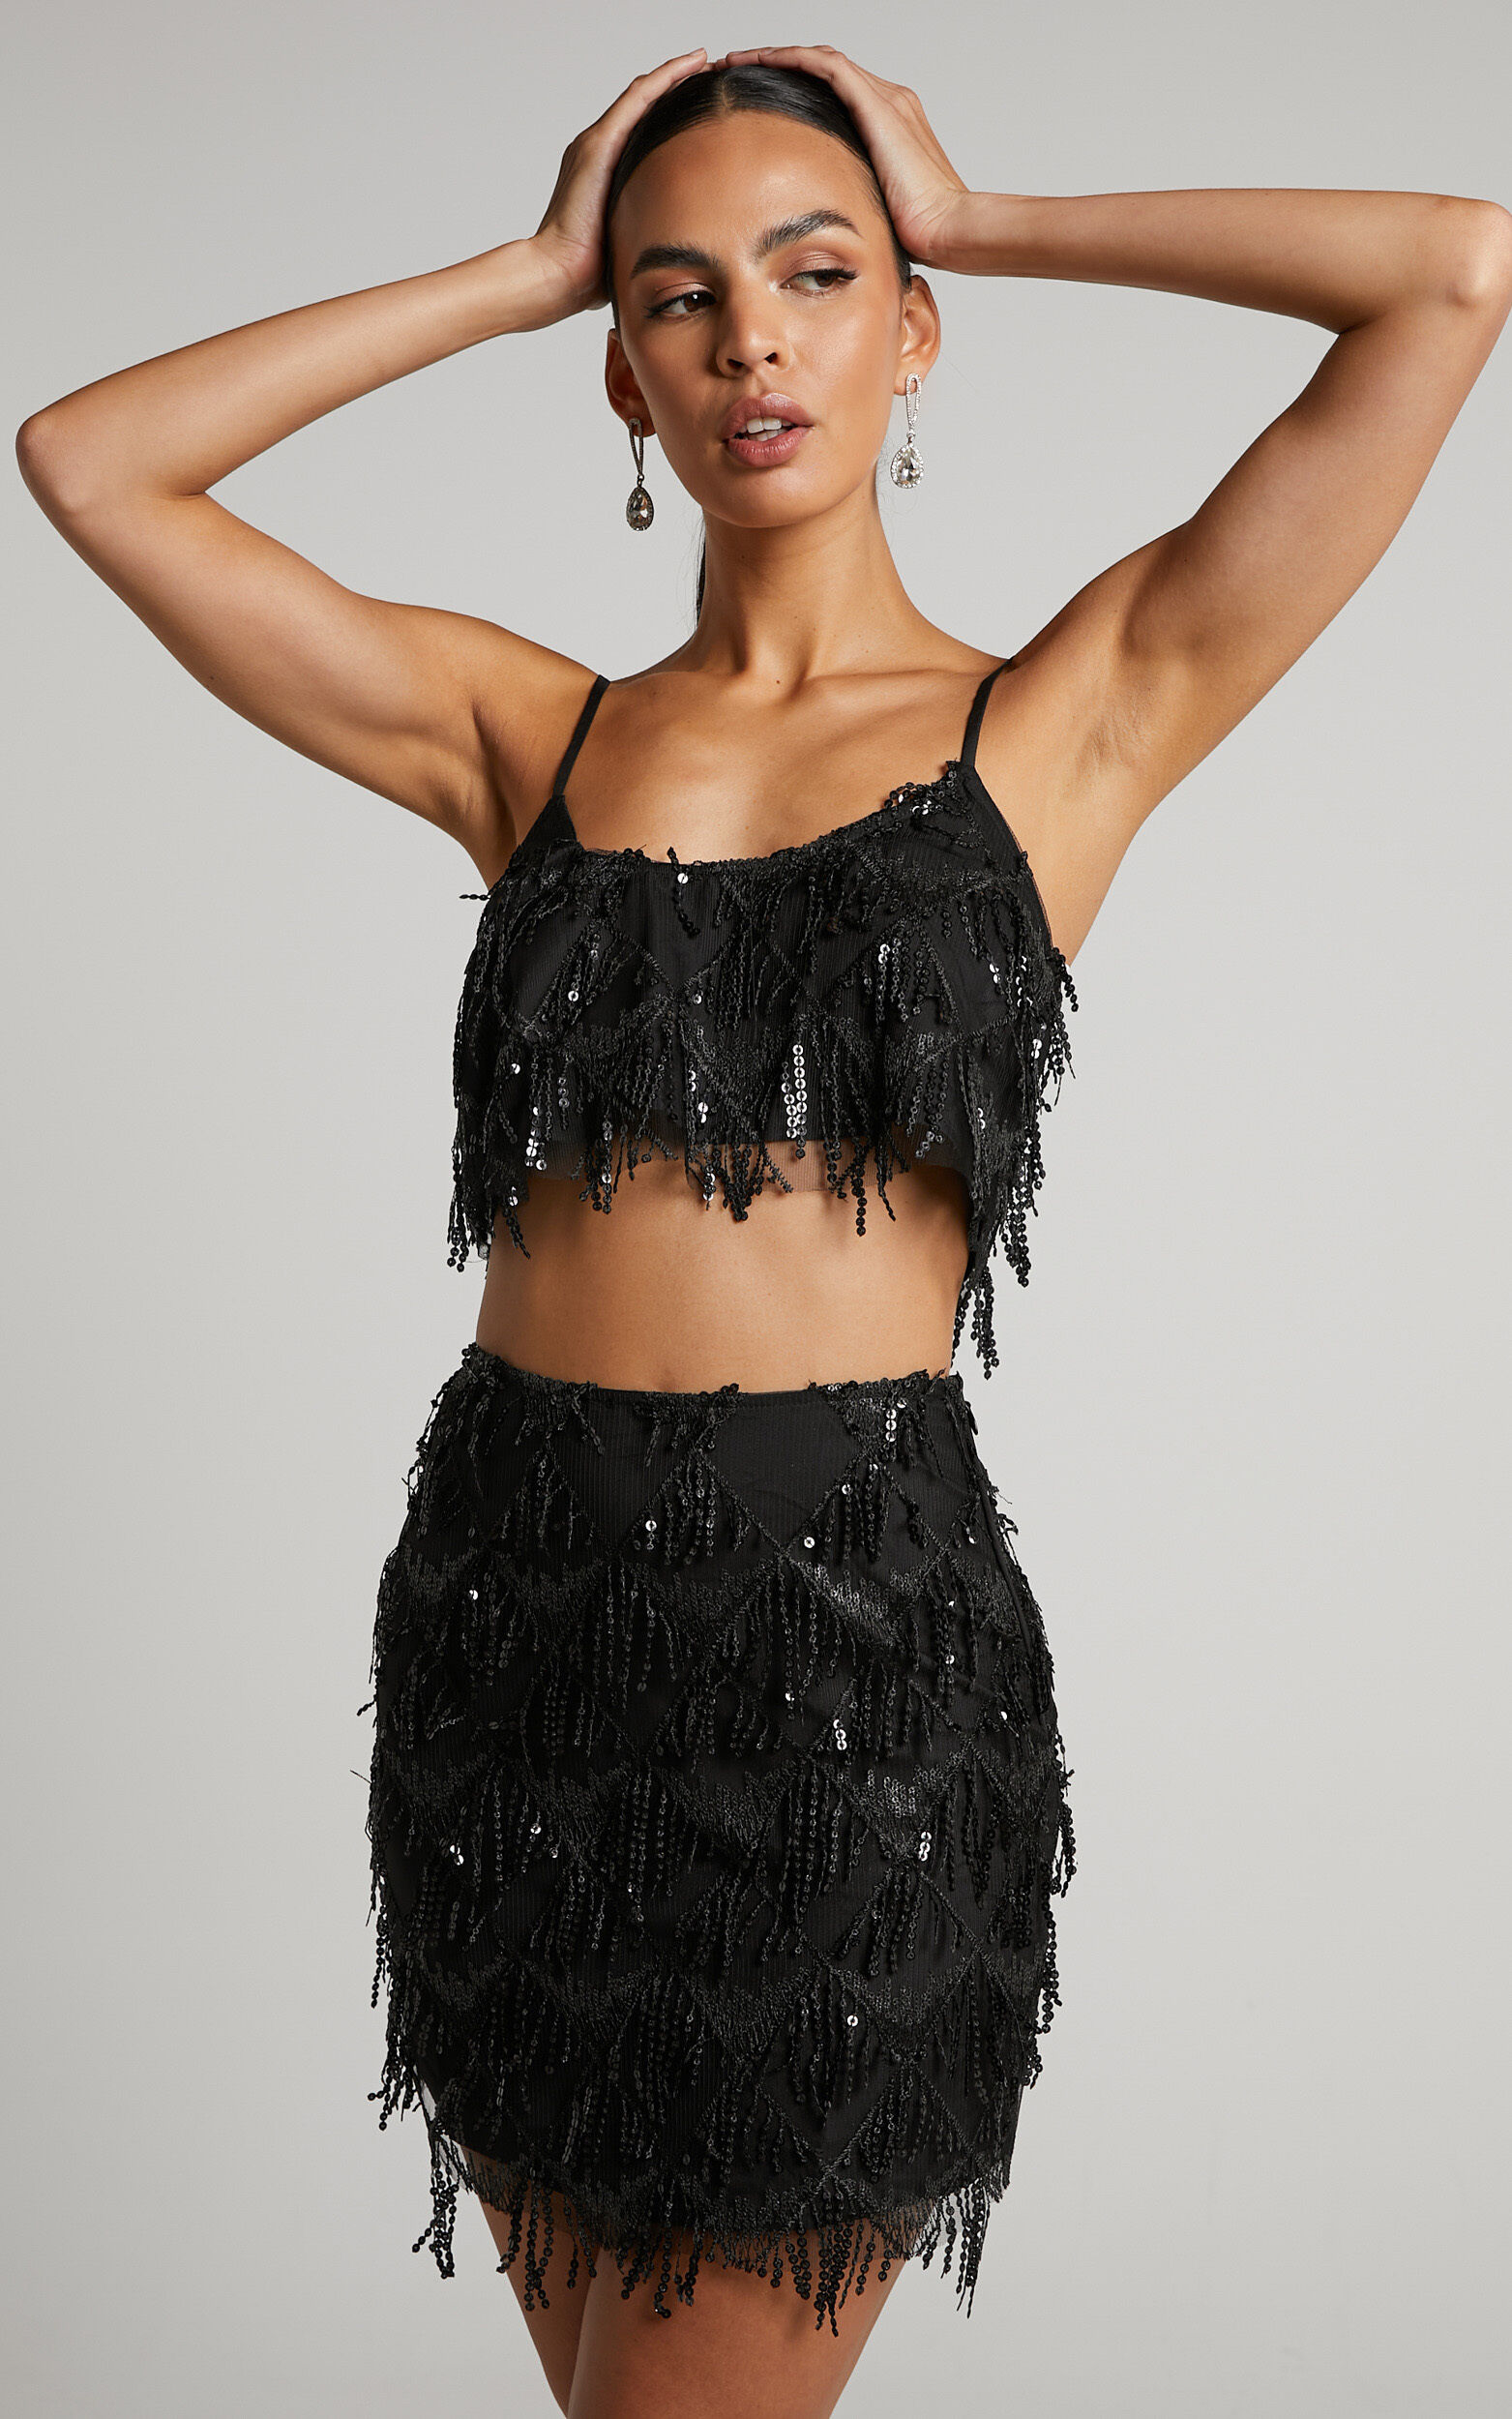 Khrizza Top - Sequin Diamond Mesh Cropped Cami Top in Black - 06, BLK1